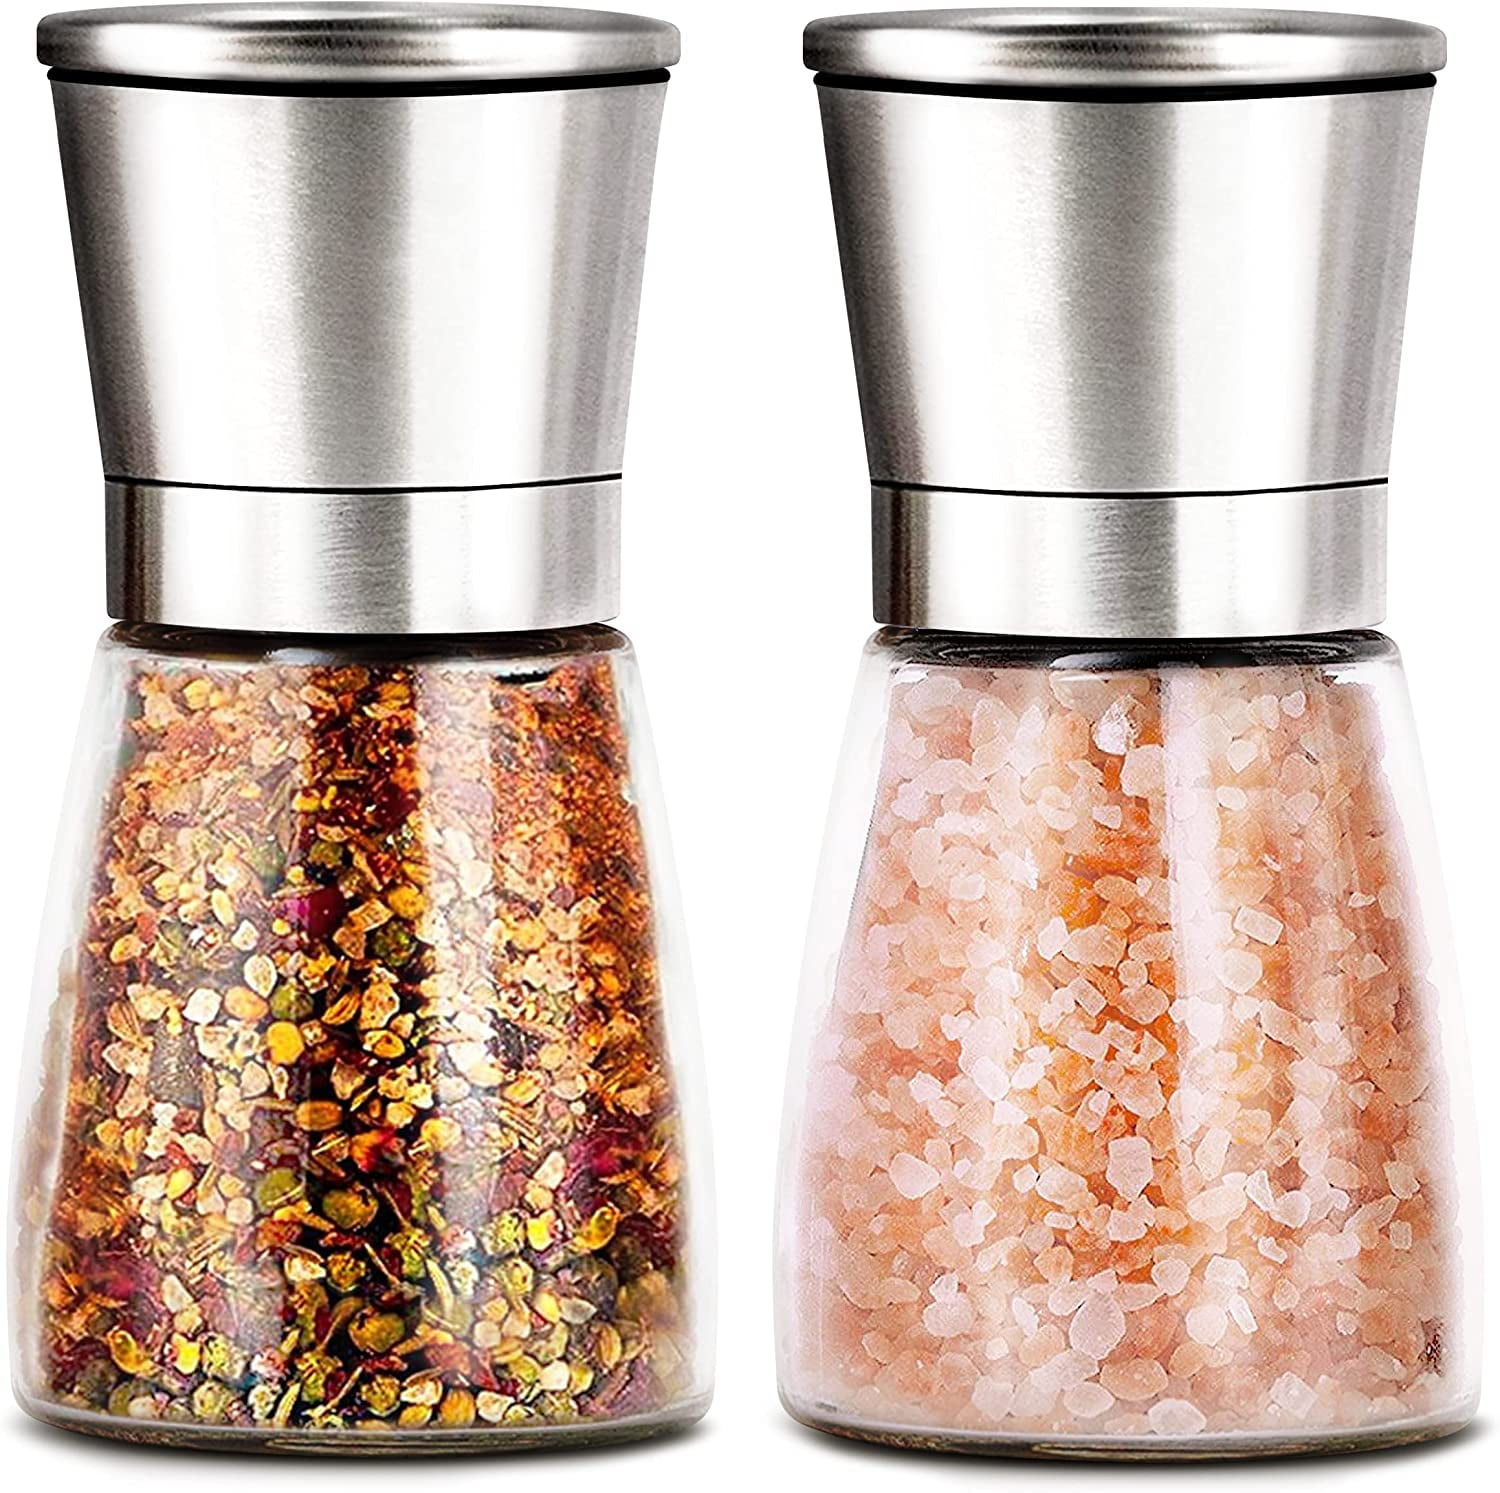  Beautiful Stainless Steel Salt and Pepper Grinder Set of 2 -  Pepper Mill & Salt Mill with Adjustable Coarseness - Glass Spice Shakers -  Easy Clean Ceramic Grinders w/Spoon & Cleaning